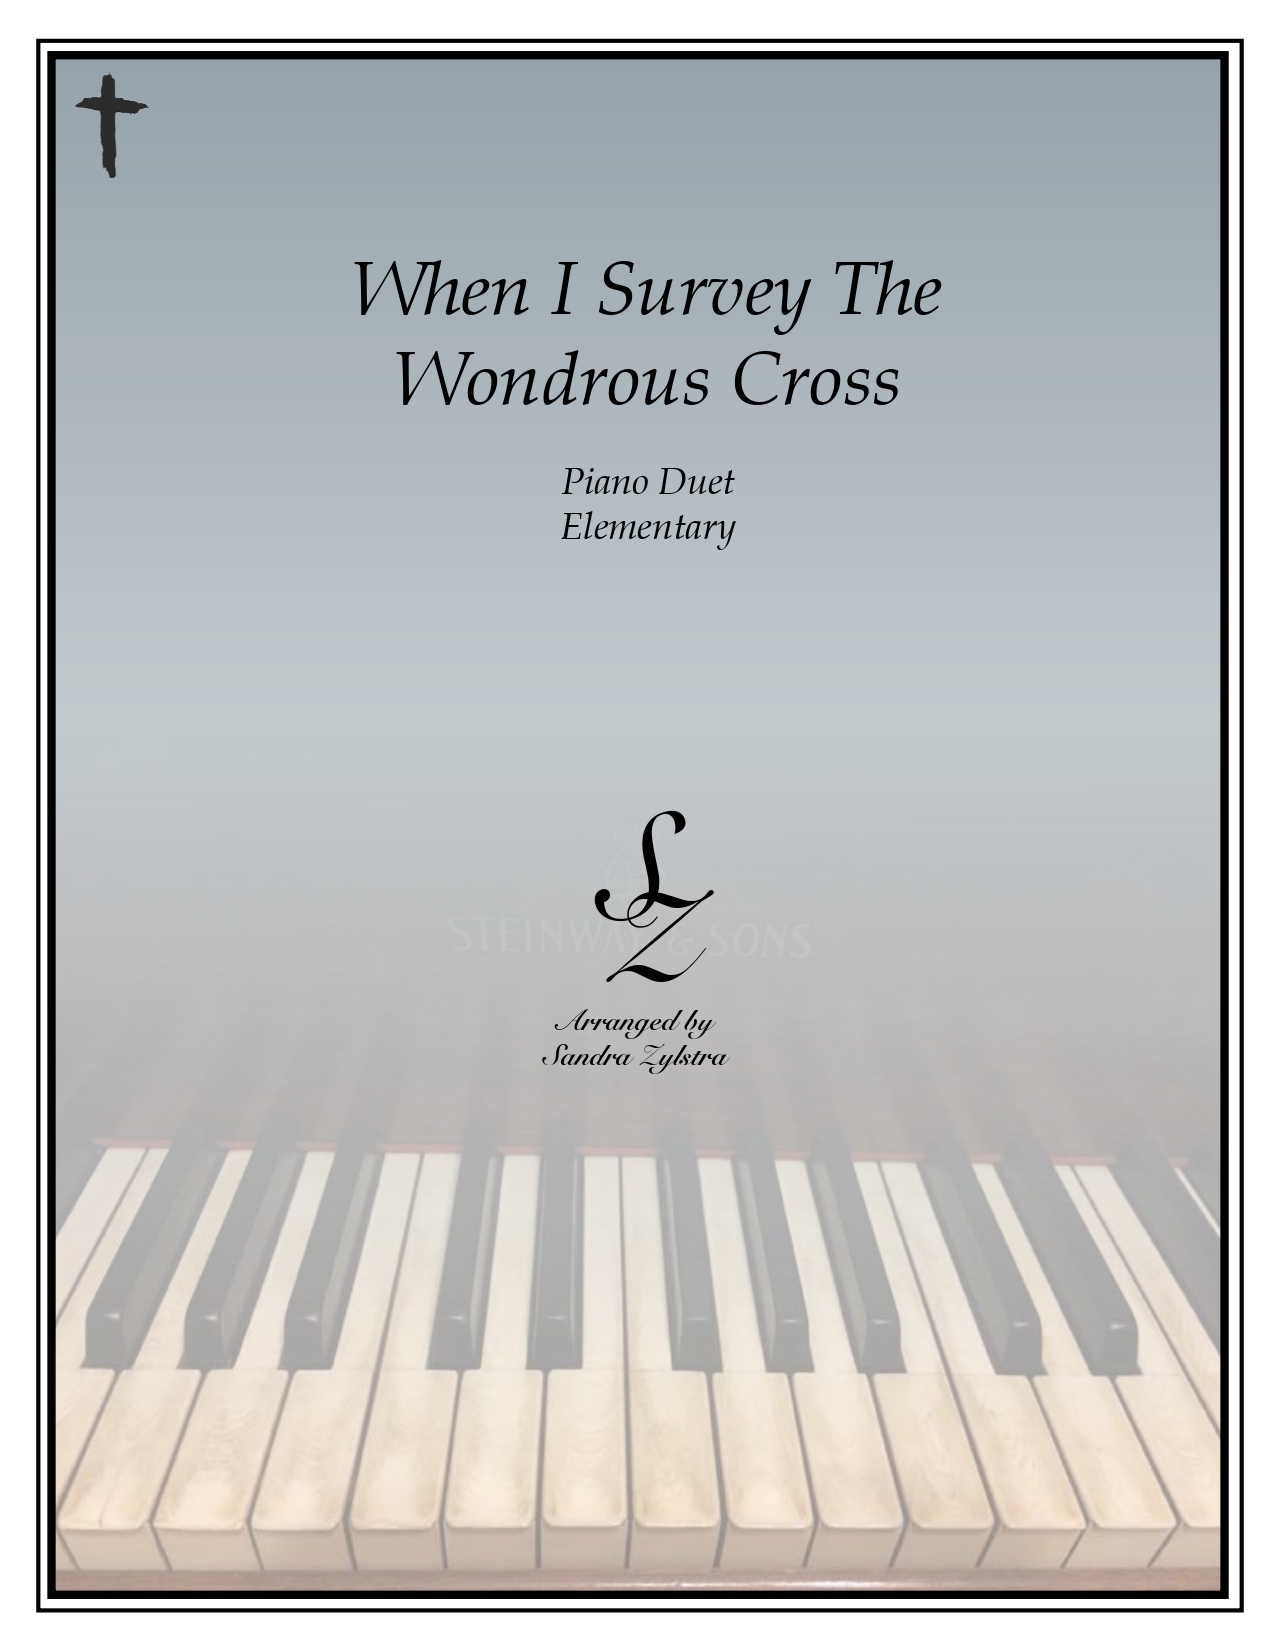 When I Survey The Wondrous Cross elementary duet cover page 00011